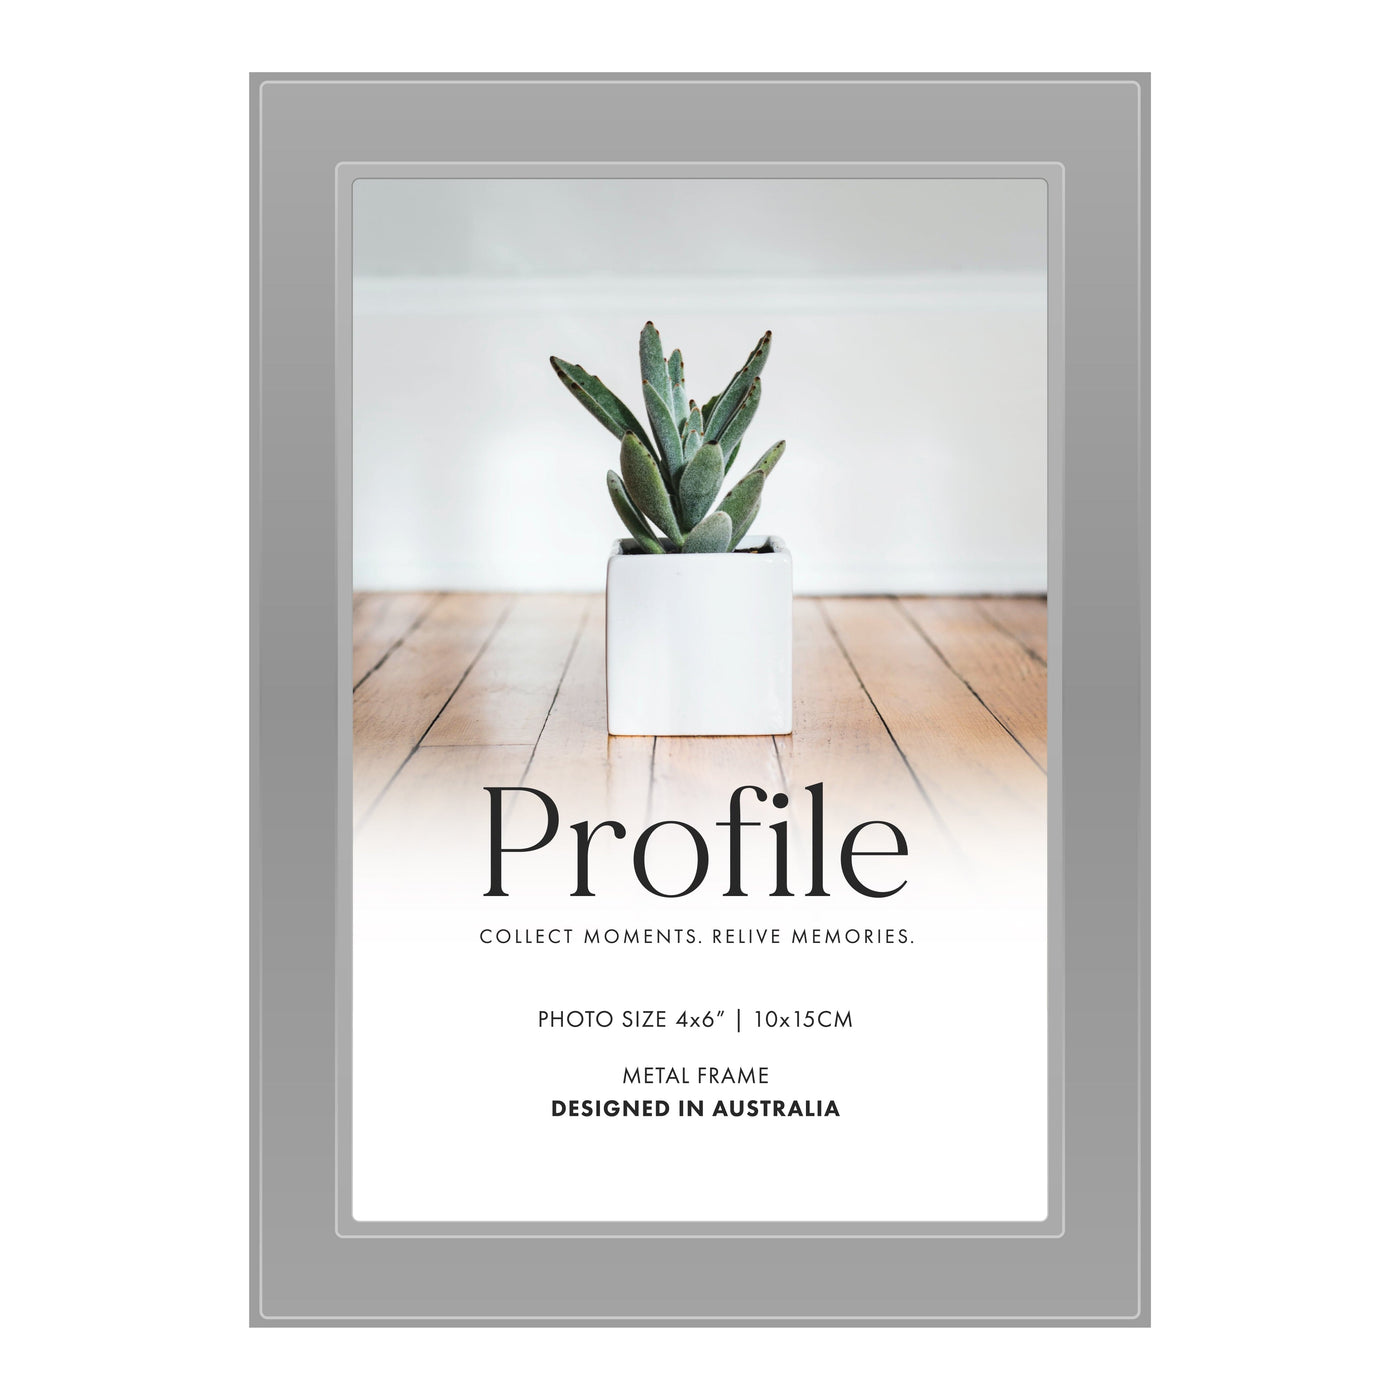 Eternal Silver Metal Photo Frame 4x6in (10x15cm) from our Metal Photo Frames collection by Profile Products Australia